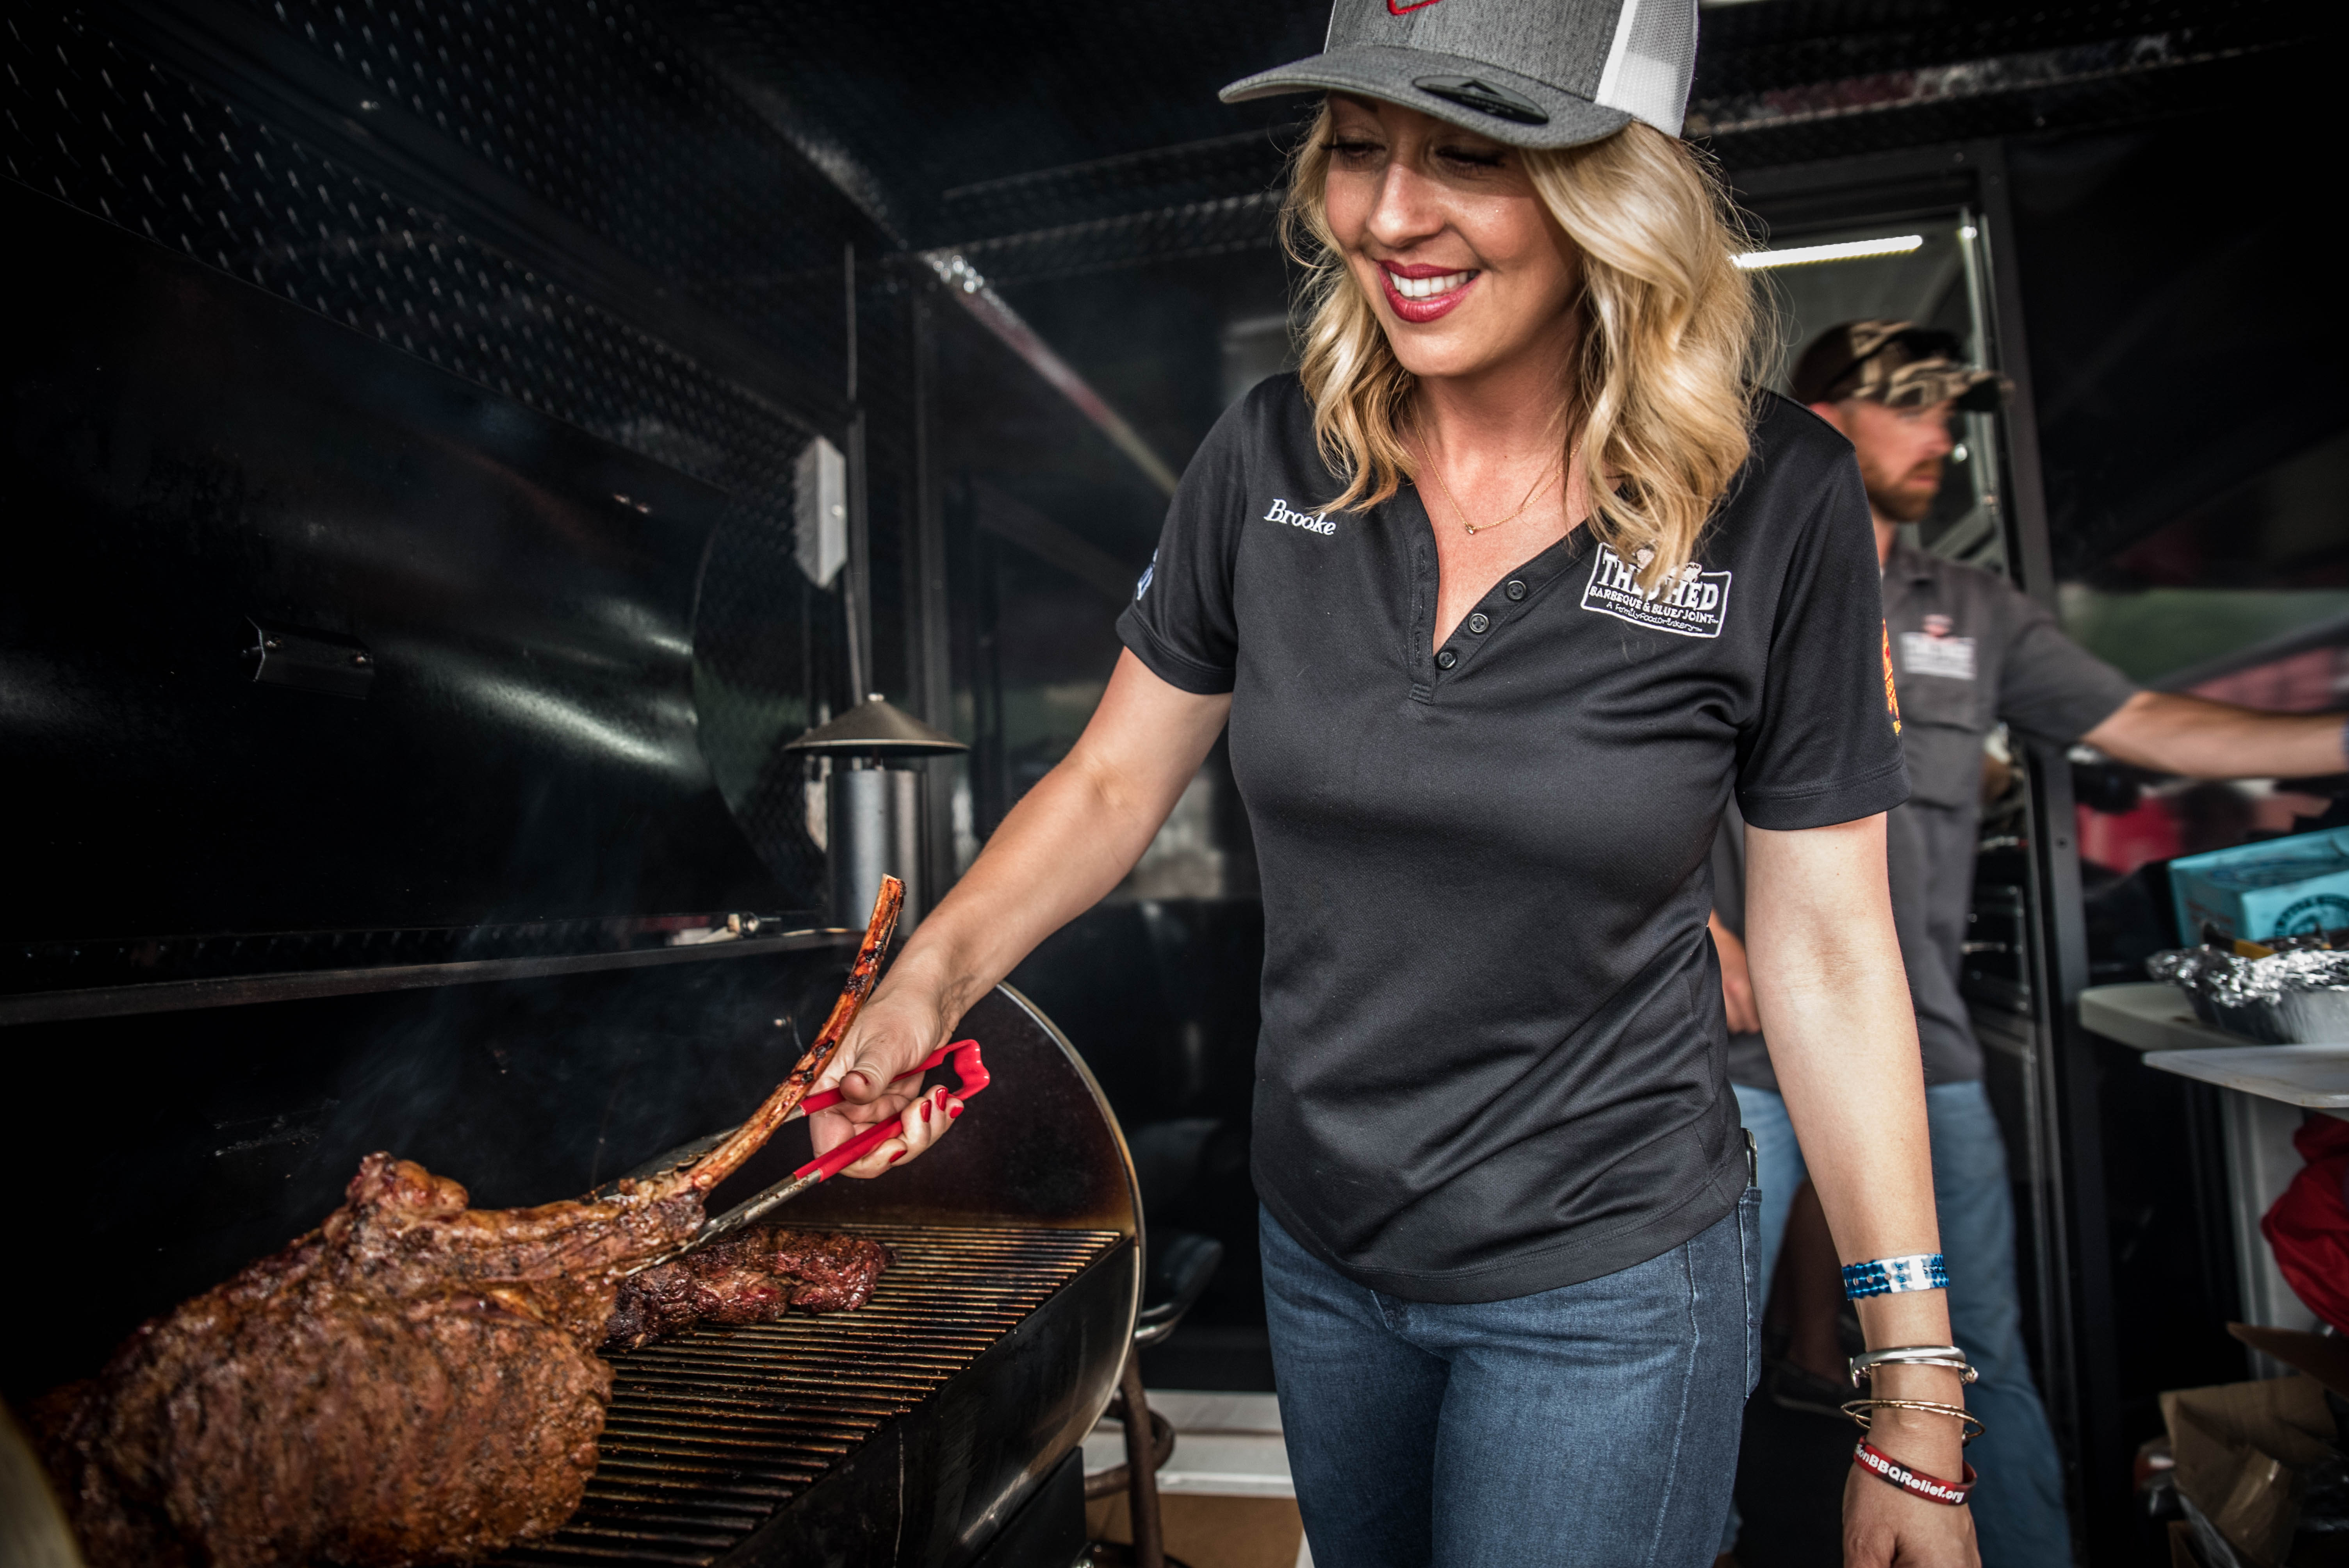 Brooke Lewis, of the Shed BBQ, is one of the celebrity chefs teaching at GrillGirl's Women's Grilling Clinic.